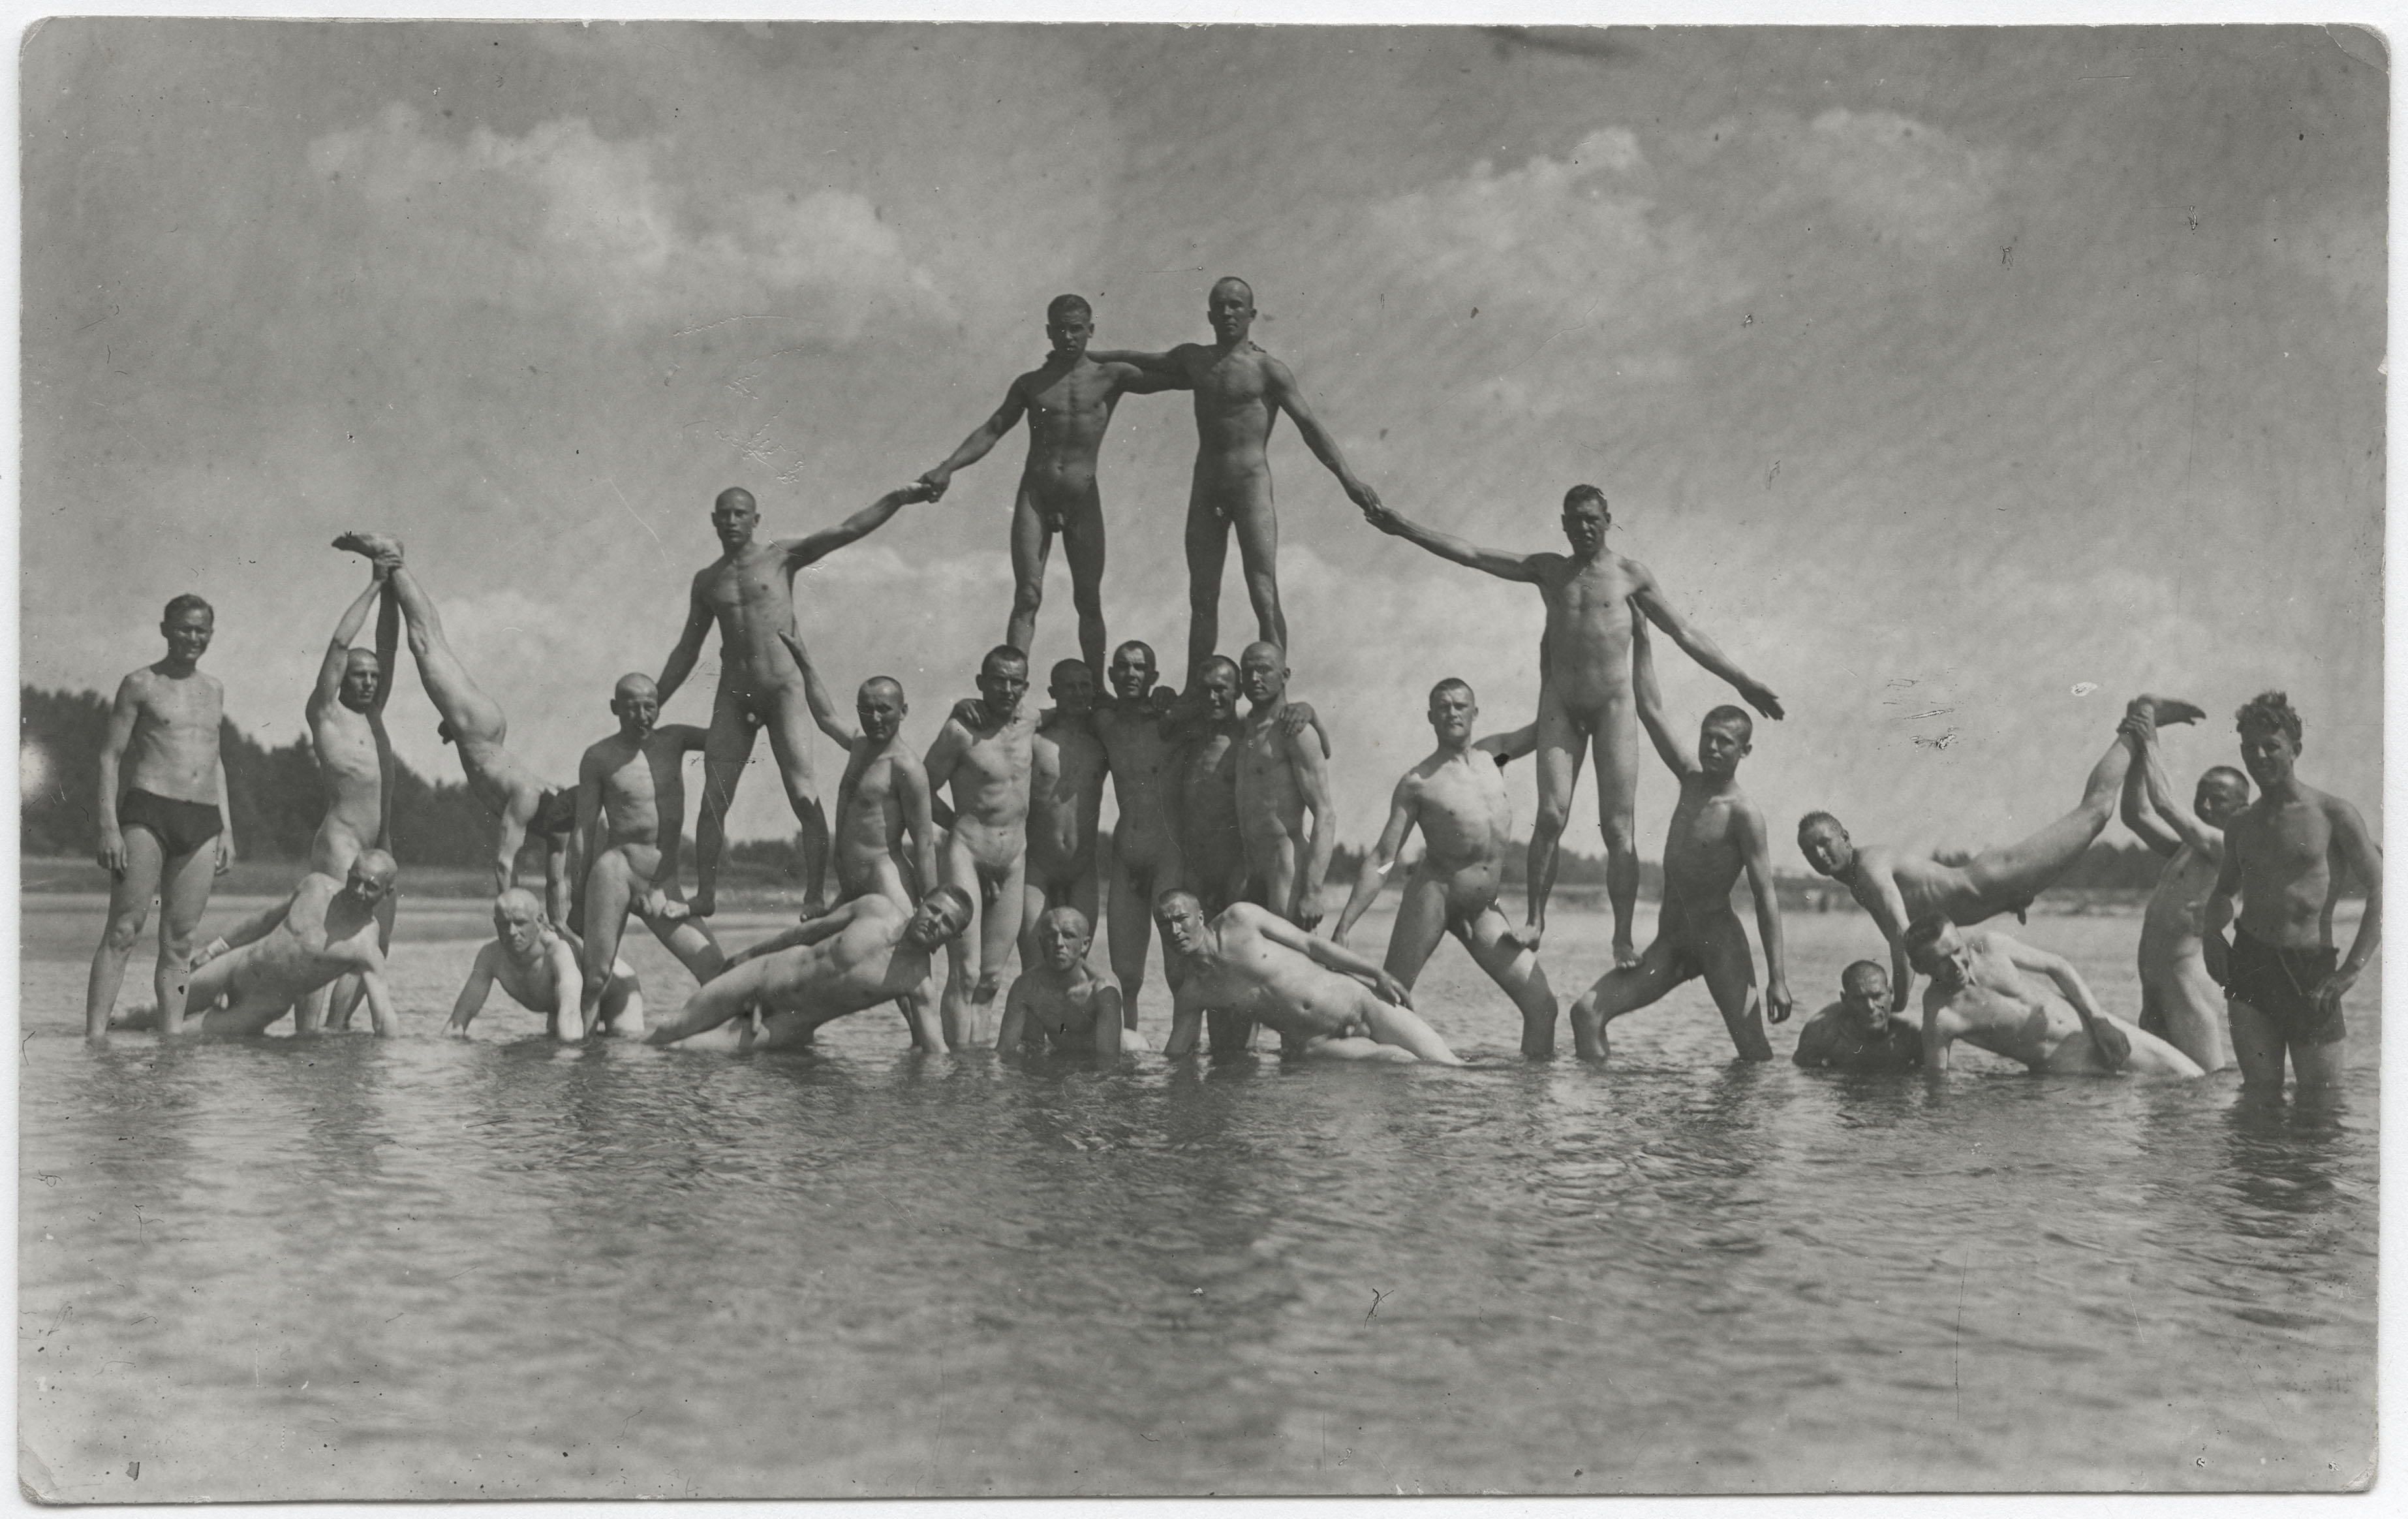 6va_wwii_naked_soldiers_282.jpg